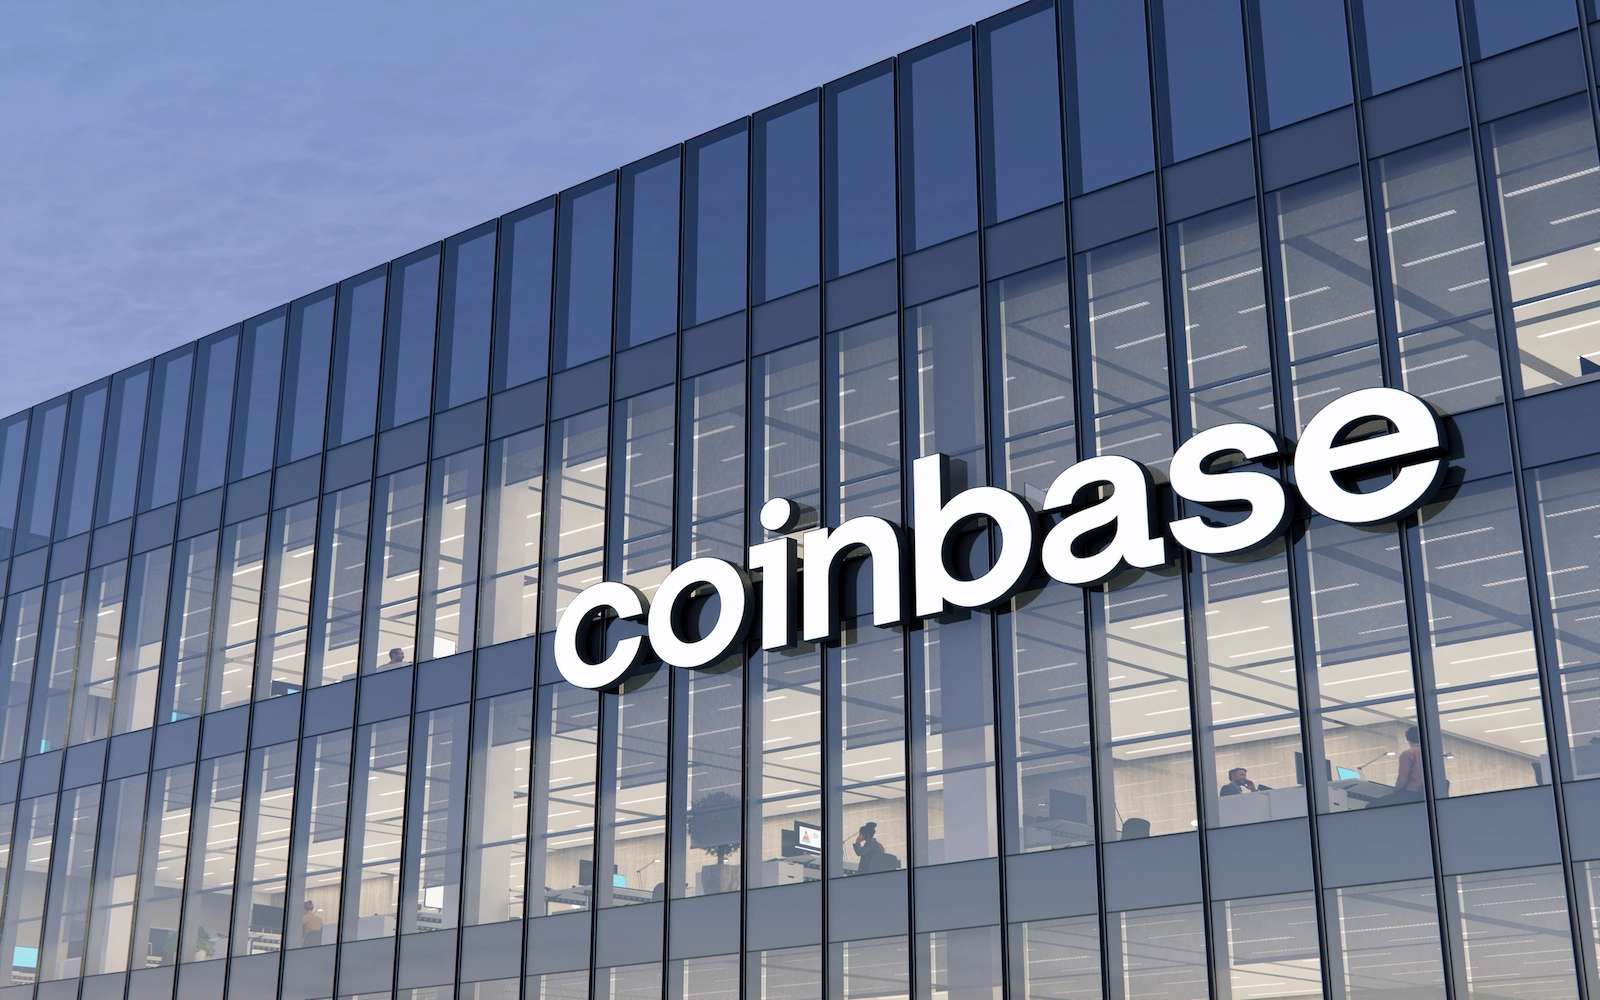 Investors Made 2,572% Profits by Shorting Coinbase Stock Just Before SEC Lawsuit